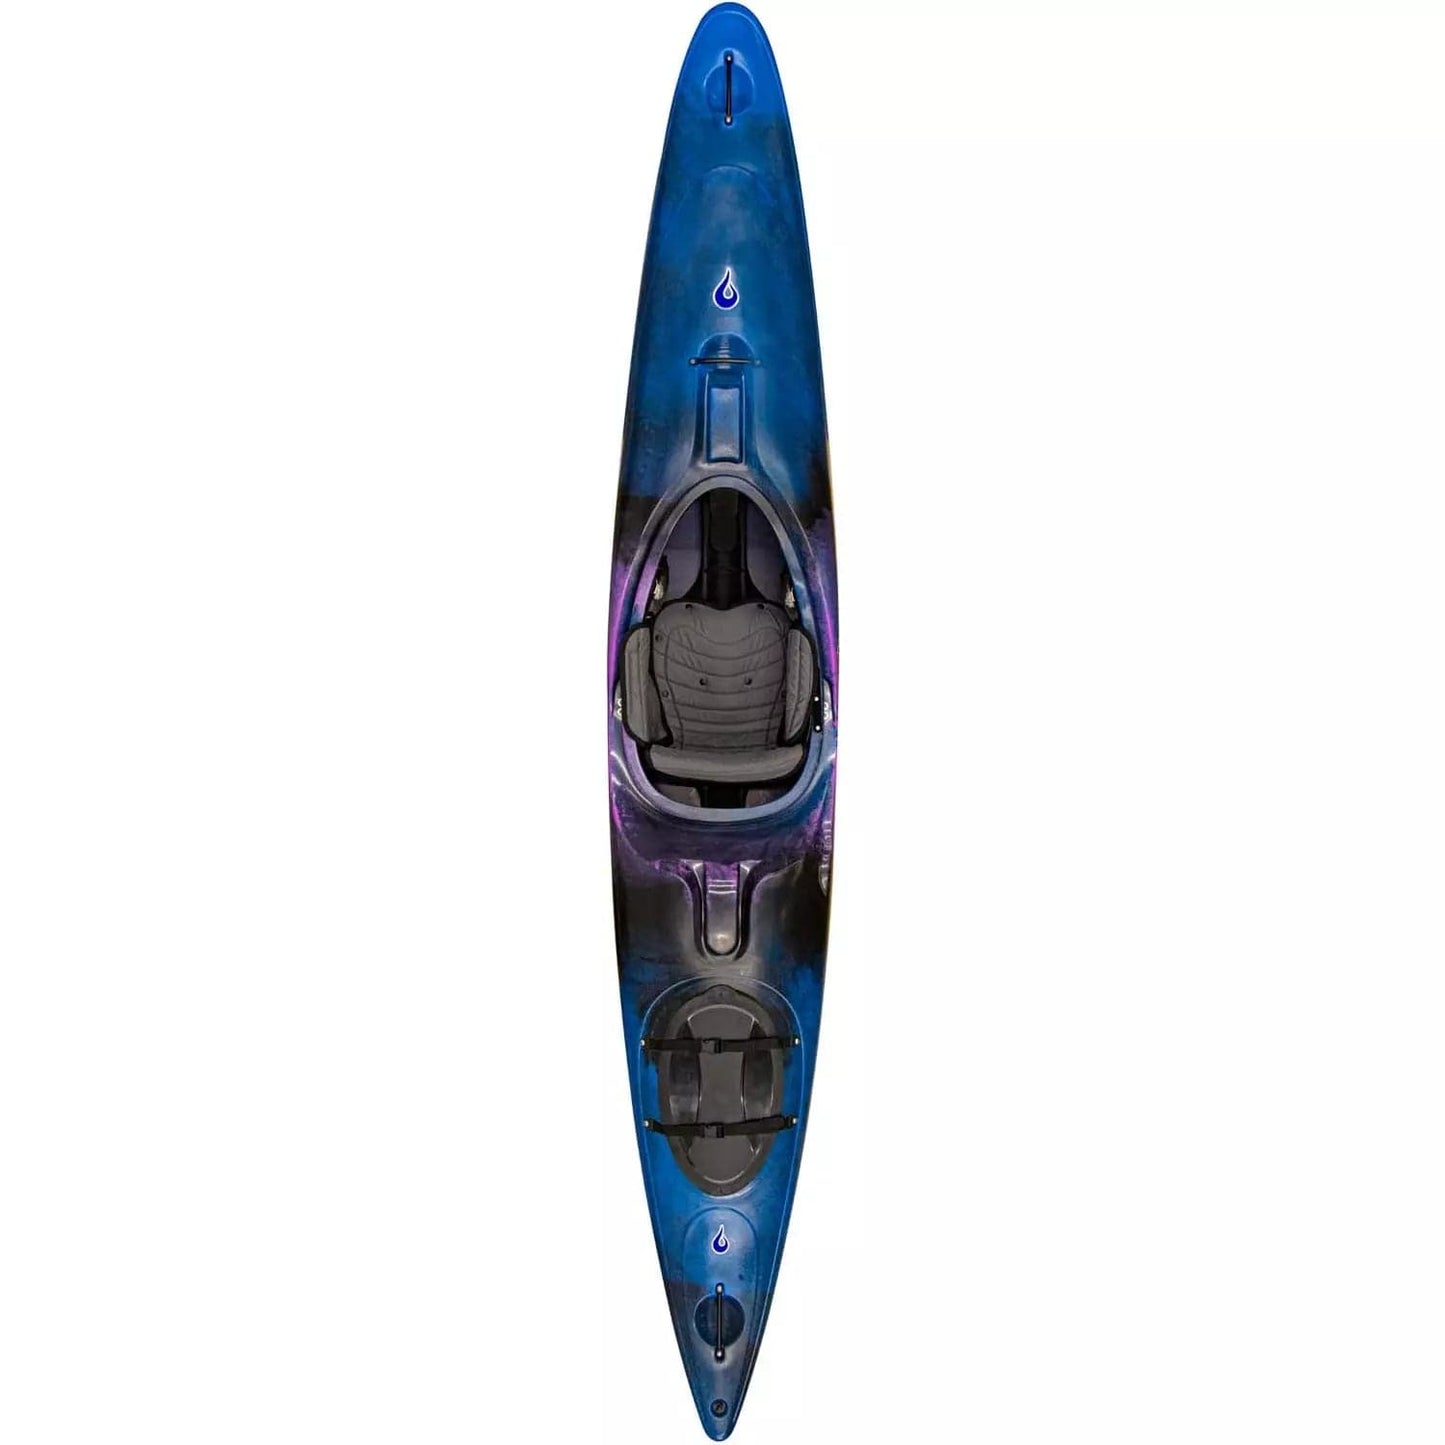 Featuring the Stinger XP expedition / cross over kayak manufactured by LiquidLogic shown here from a second angle.